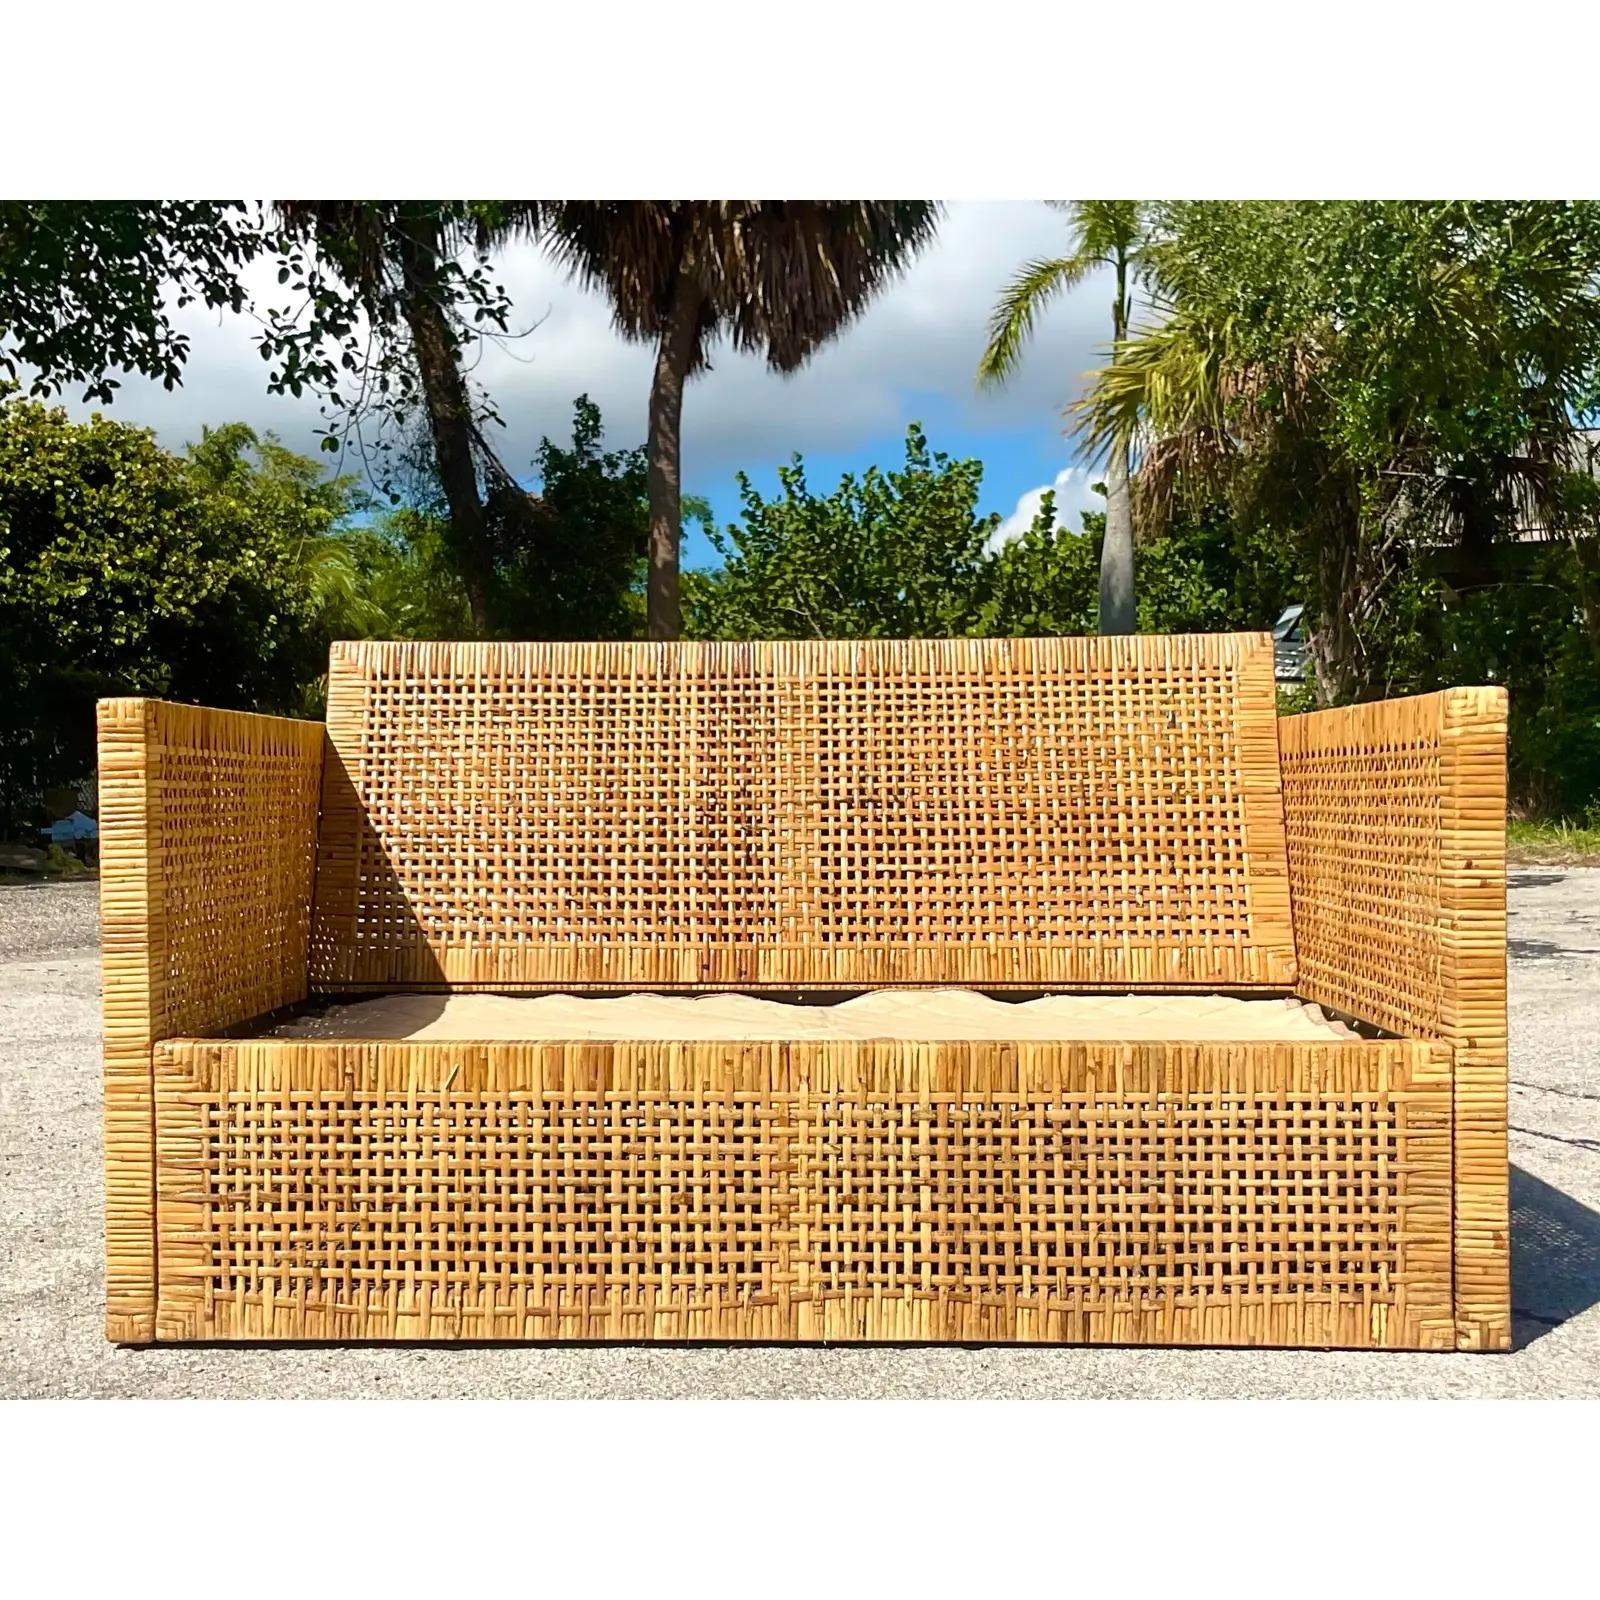 Fantastic vintage coastal loveseat. Beautiful wrapped rattan frame in chic warm browns. Cushions included in the purchase. Acquired from a Palm Beach estate.